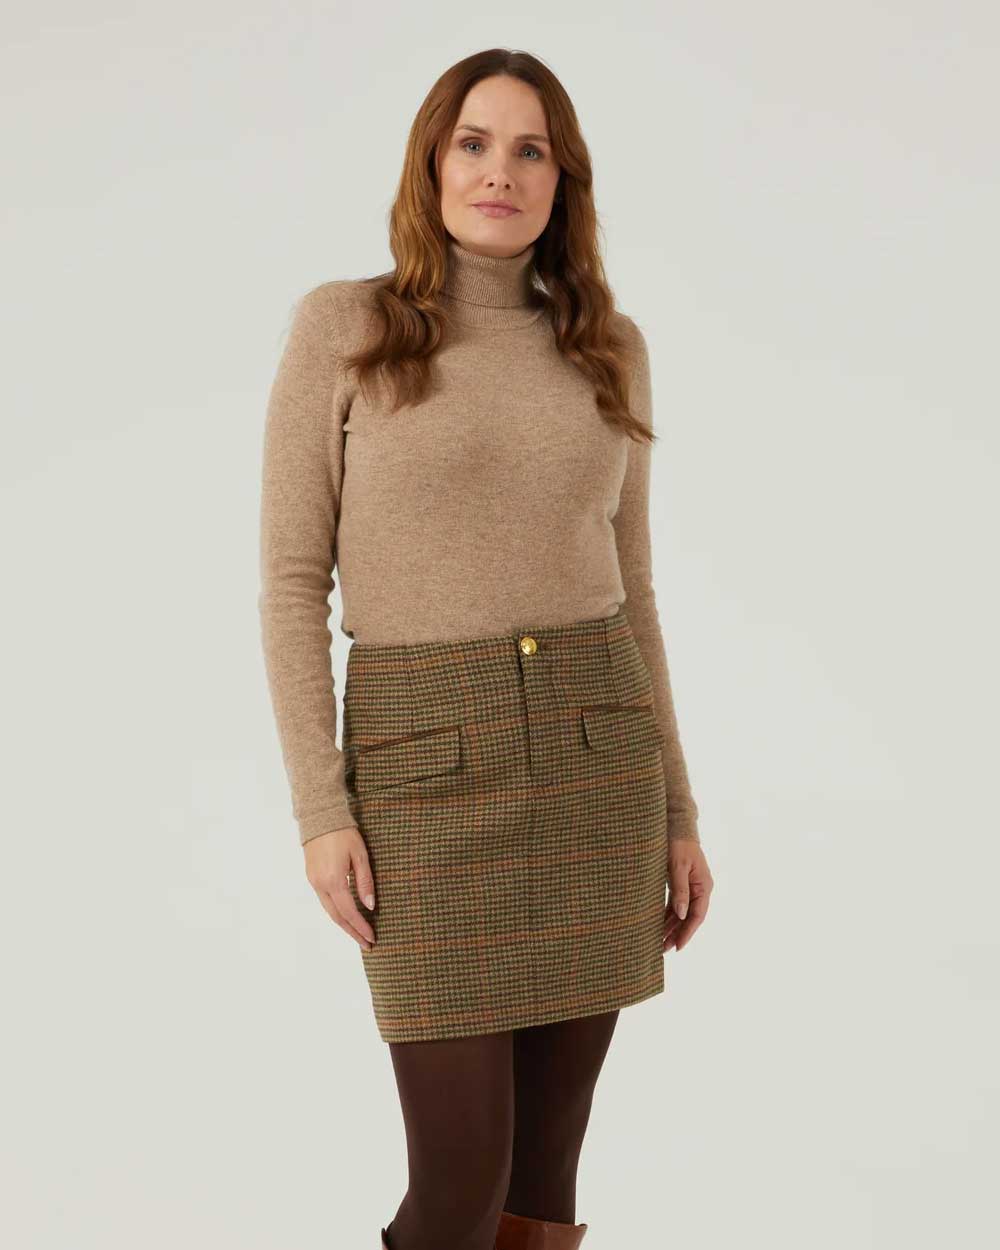 Alan Paine Womens Surrey Skirt in Sycamore 